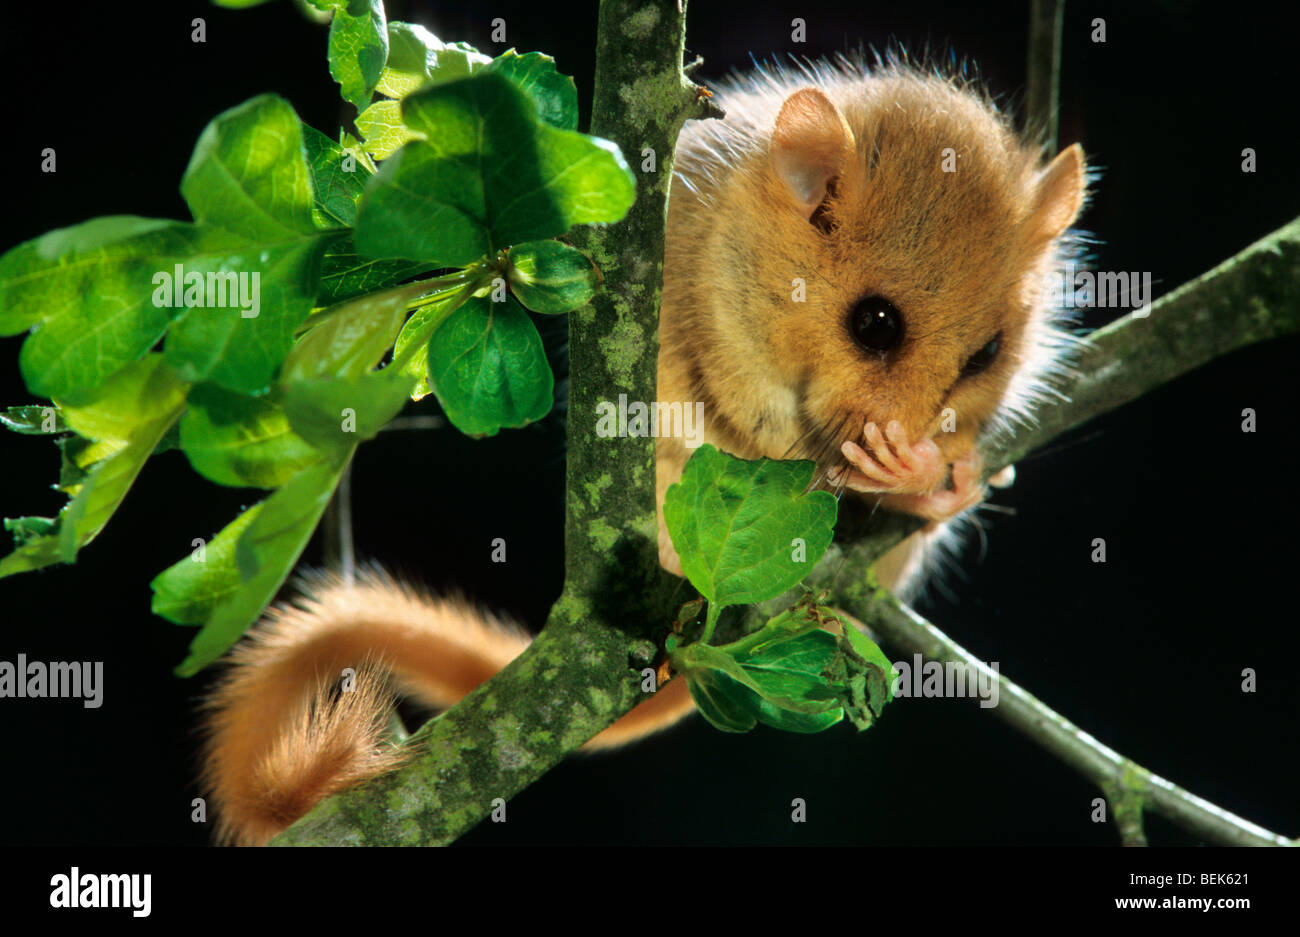 Common dormouse / hazel dormouse (Muscardinus avellanarius) foraging in tree for hazelnuts in forest at night Stock Photo